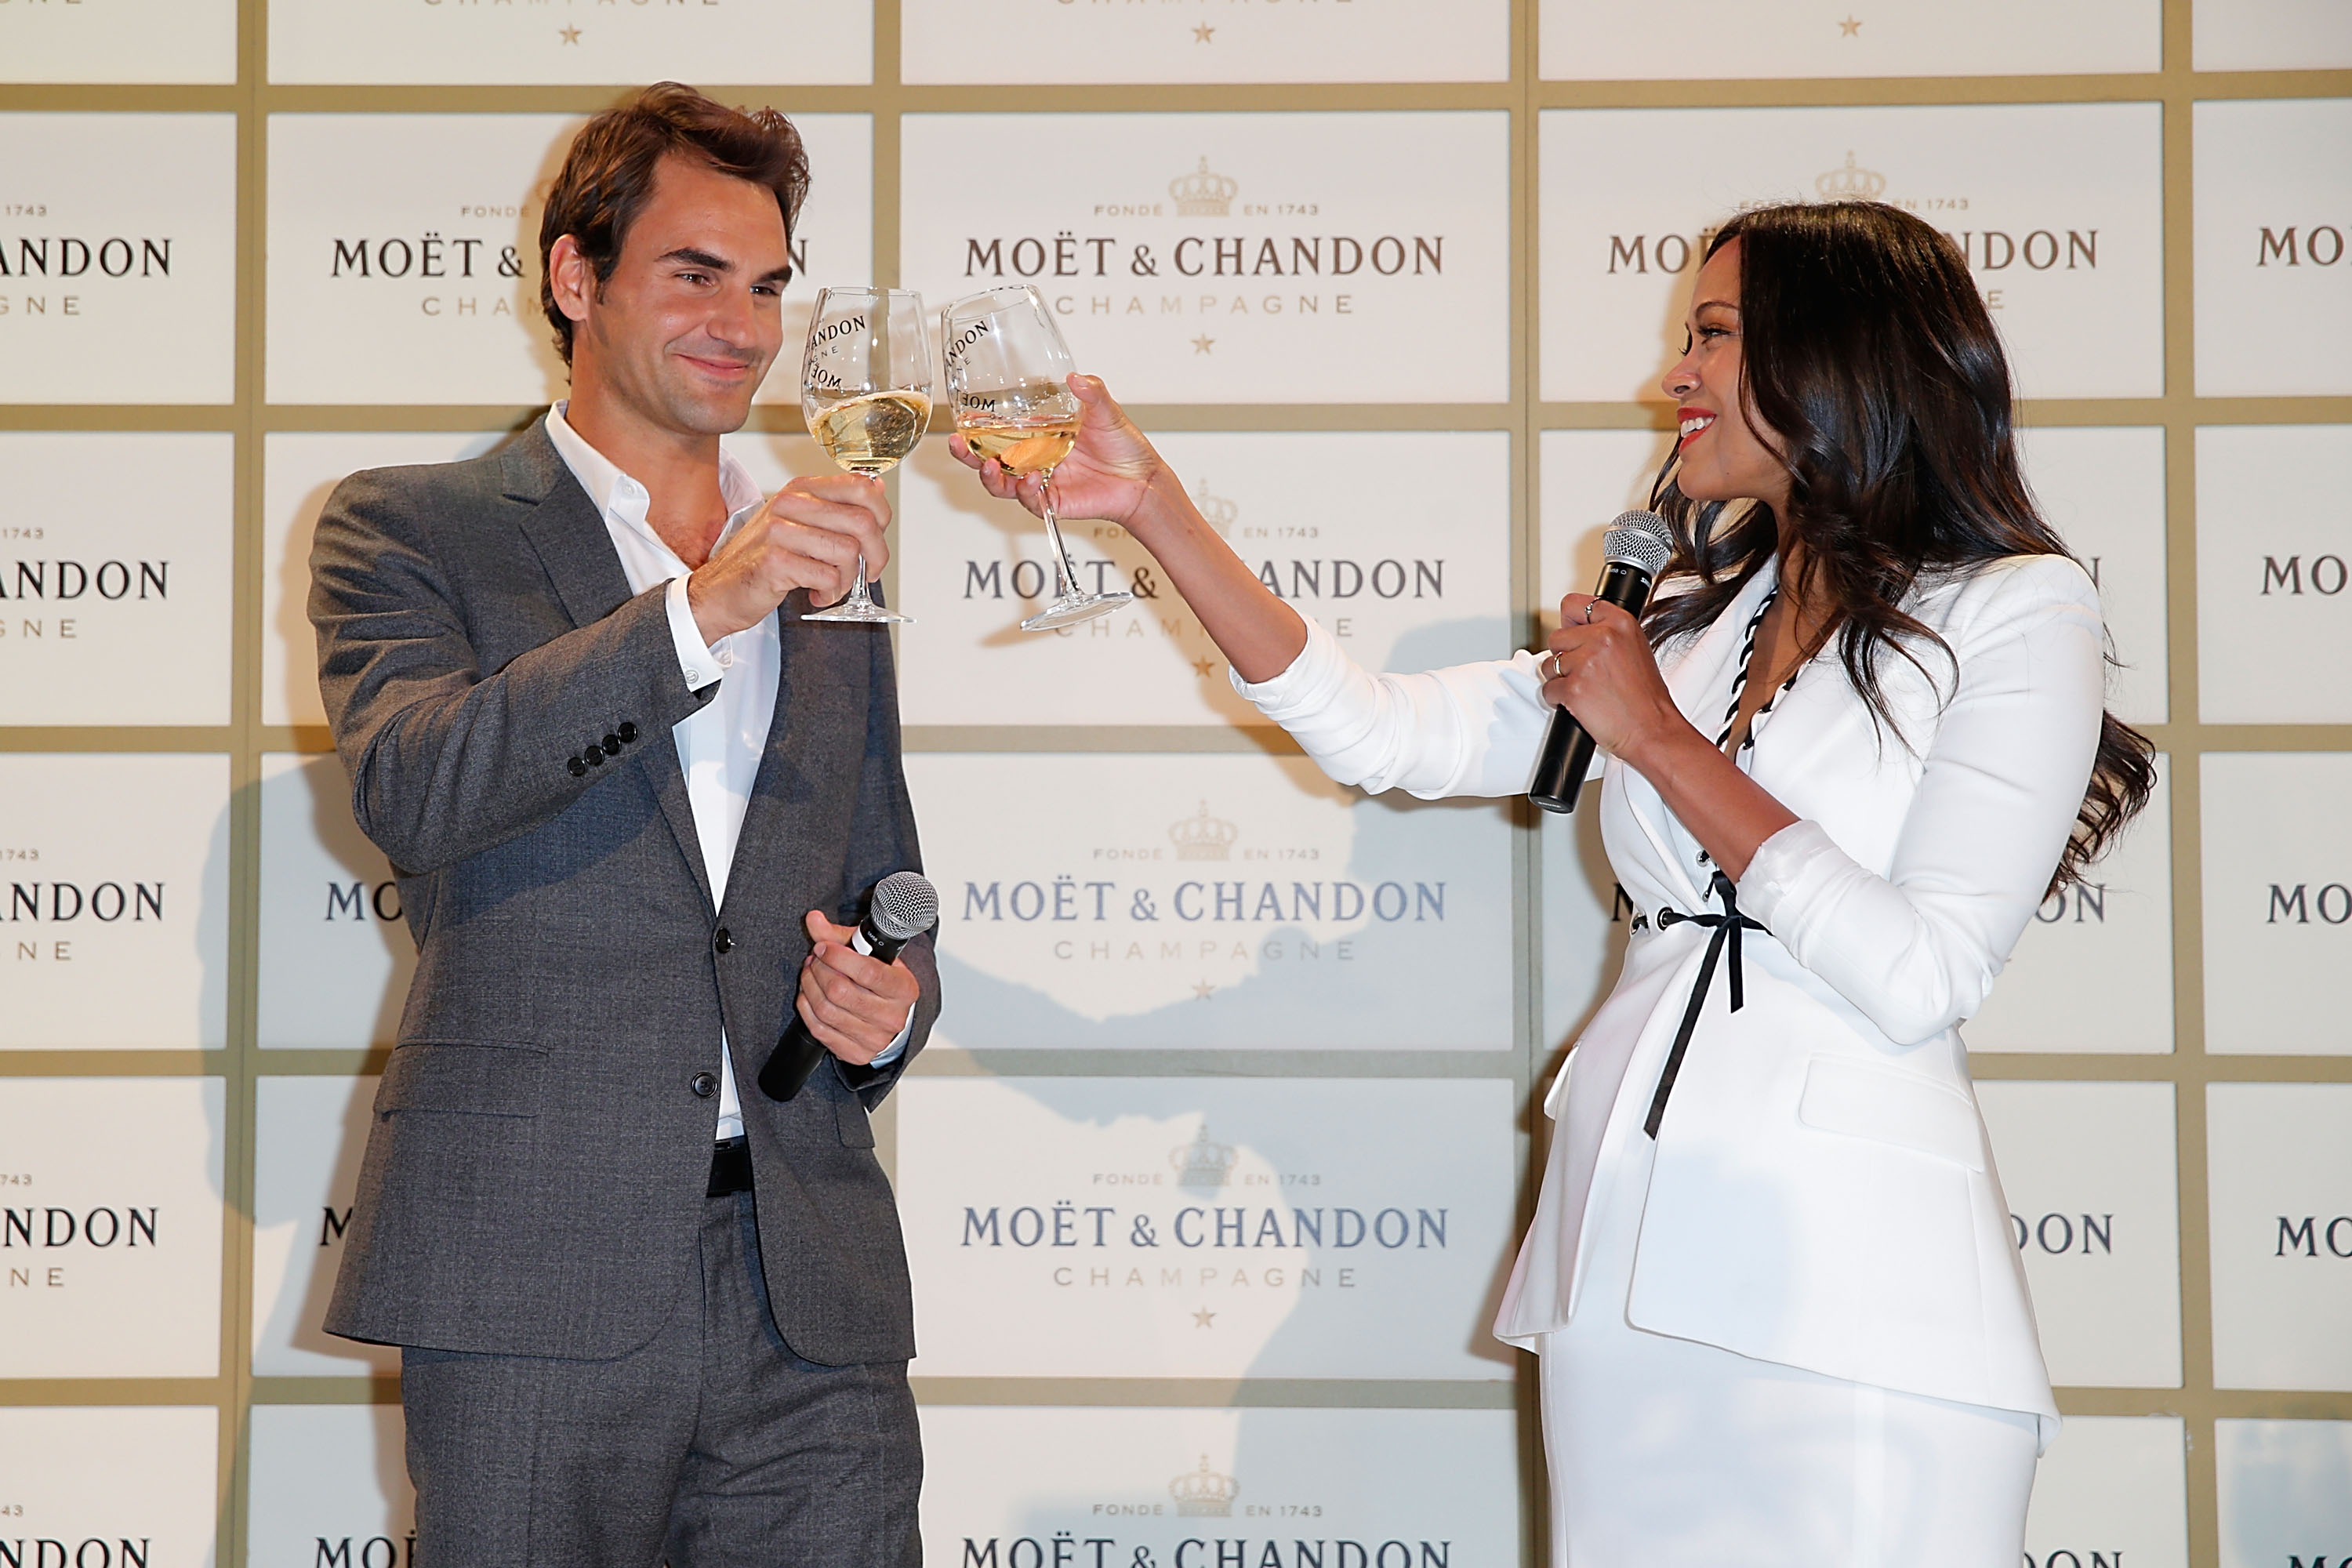 Actress Zoe Saldana (L) and tennis player Roger Federer attend the Moet & Chandon toast to honor brand ambassador Roger Federer's history-making 1,000th career win